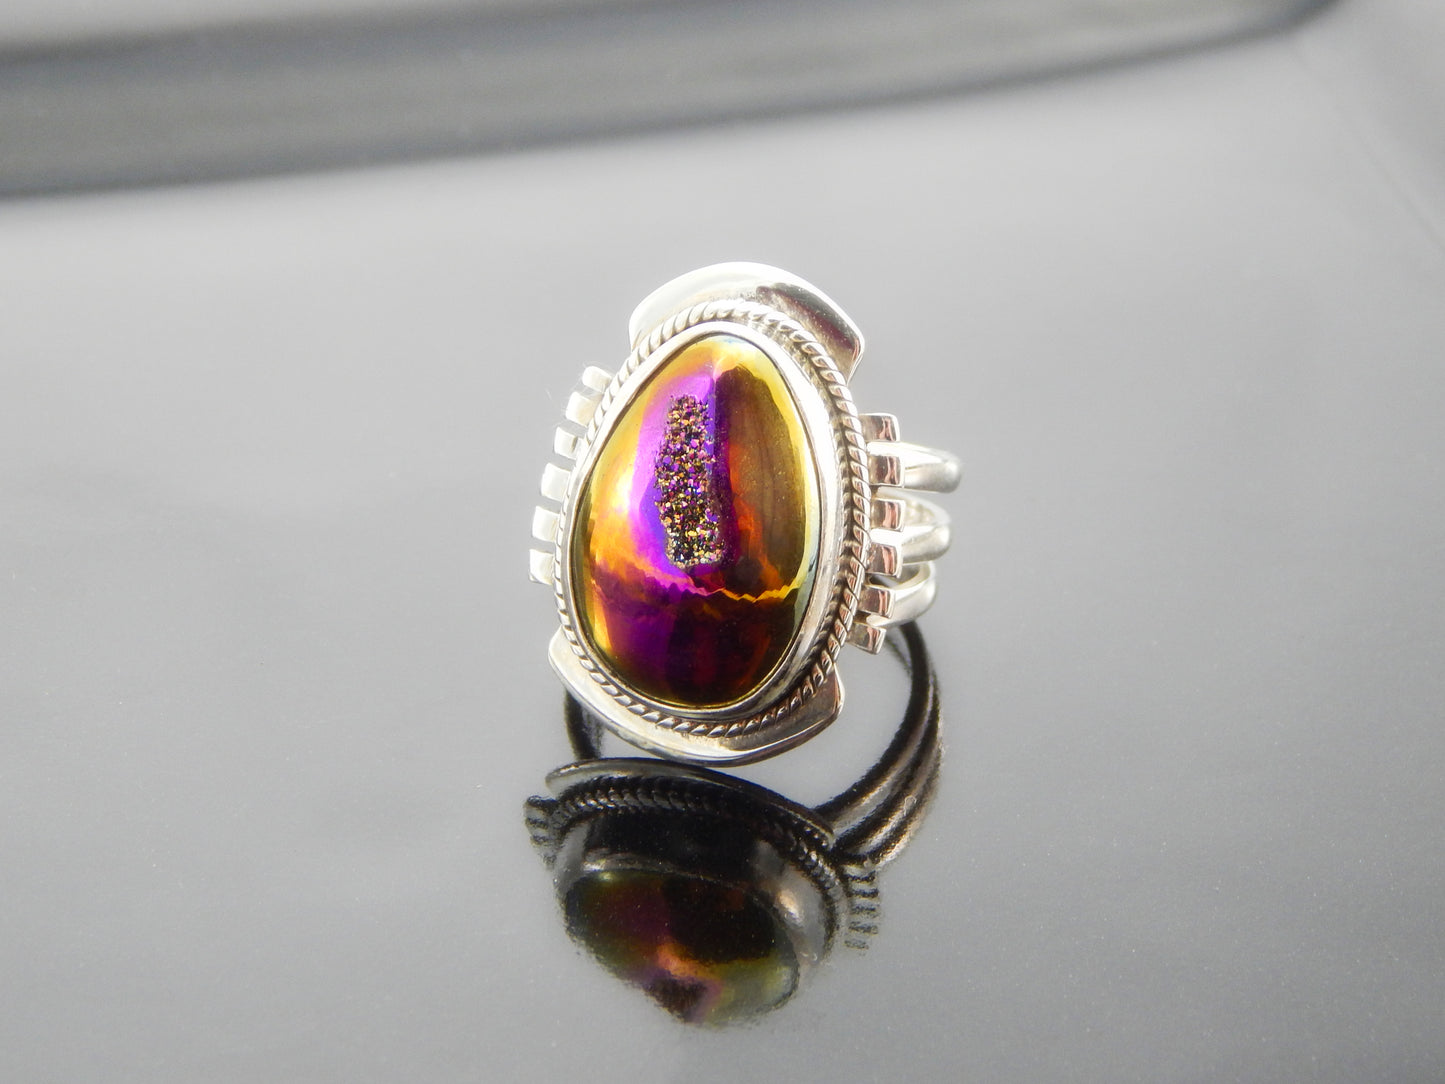 Pink and Gold Druzy Gemstone Ring in 925 Silver